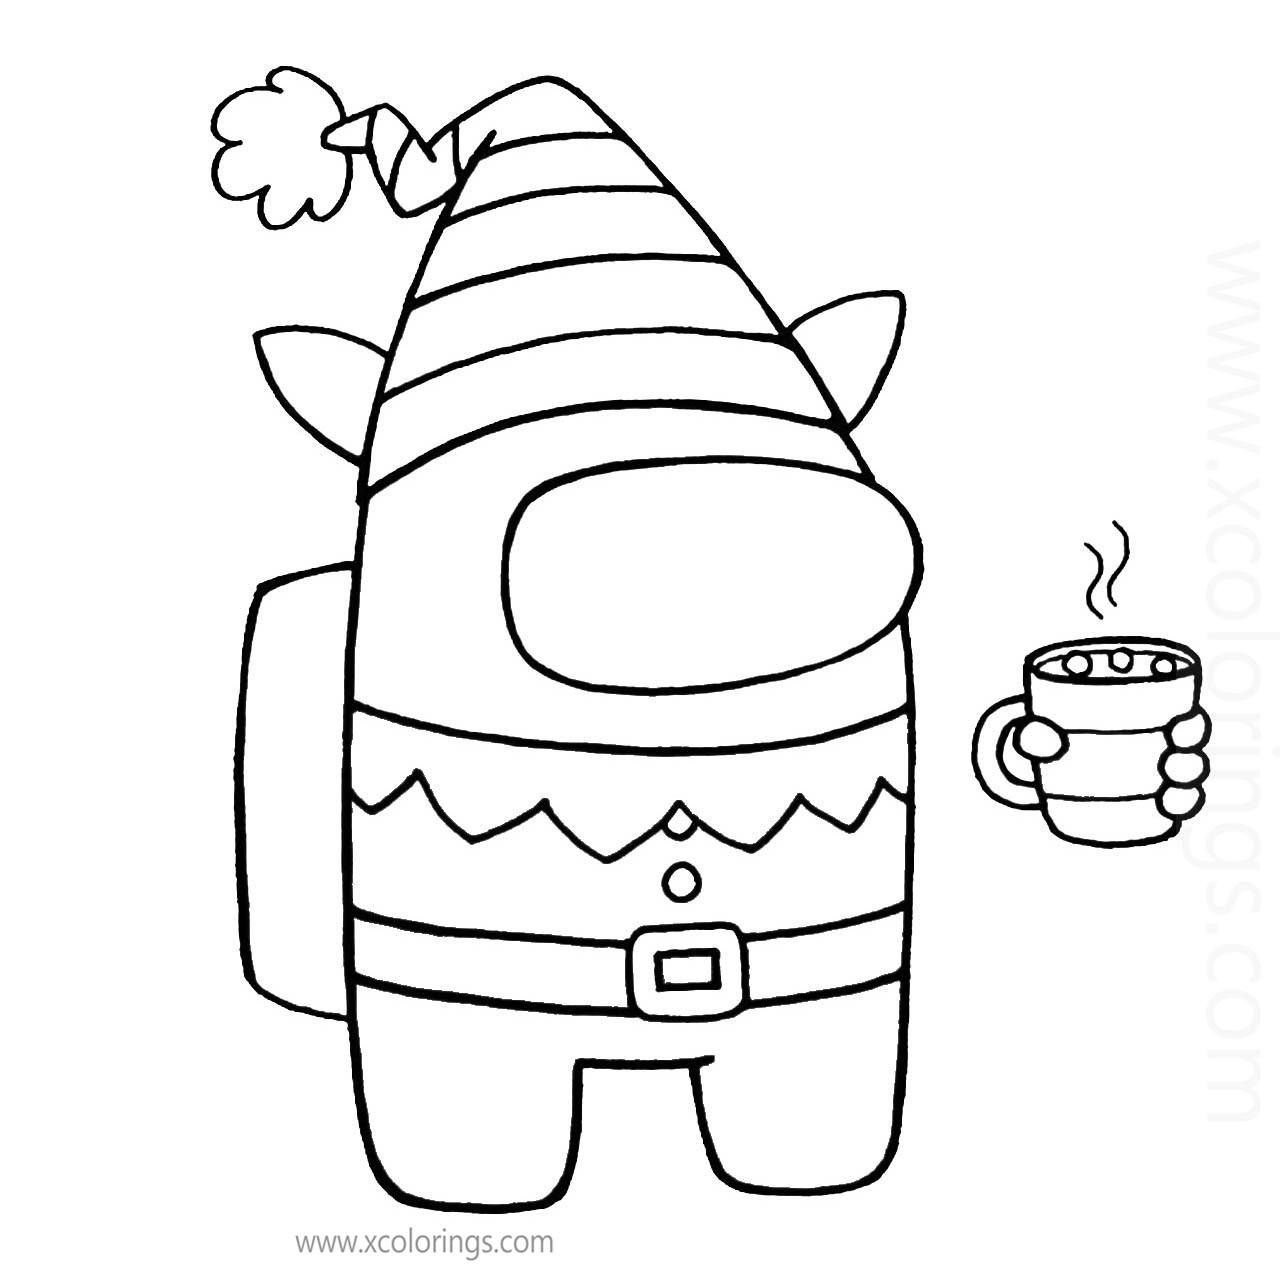 Drawing Among Us Coloring Pages Impostor / How Do You Like ...